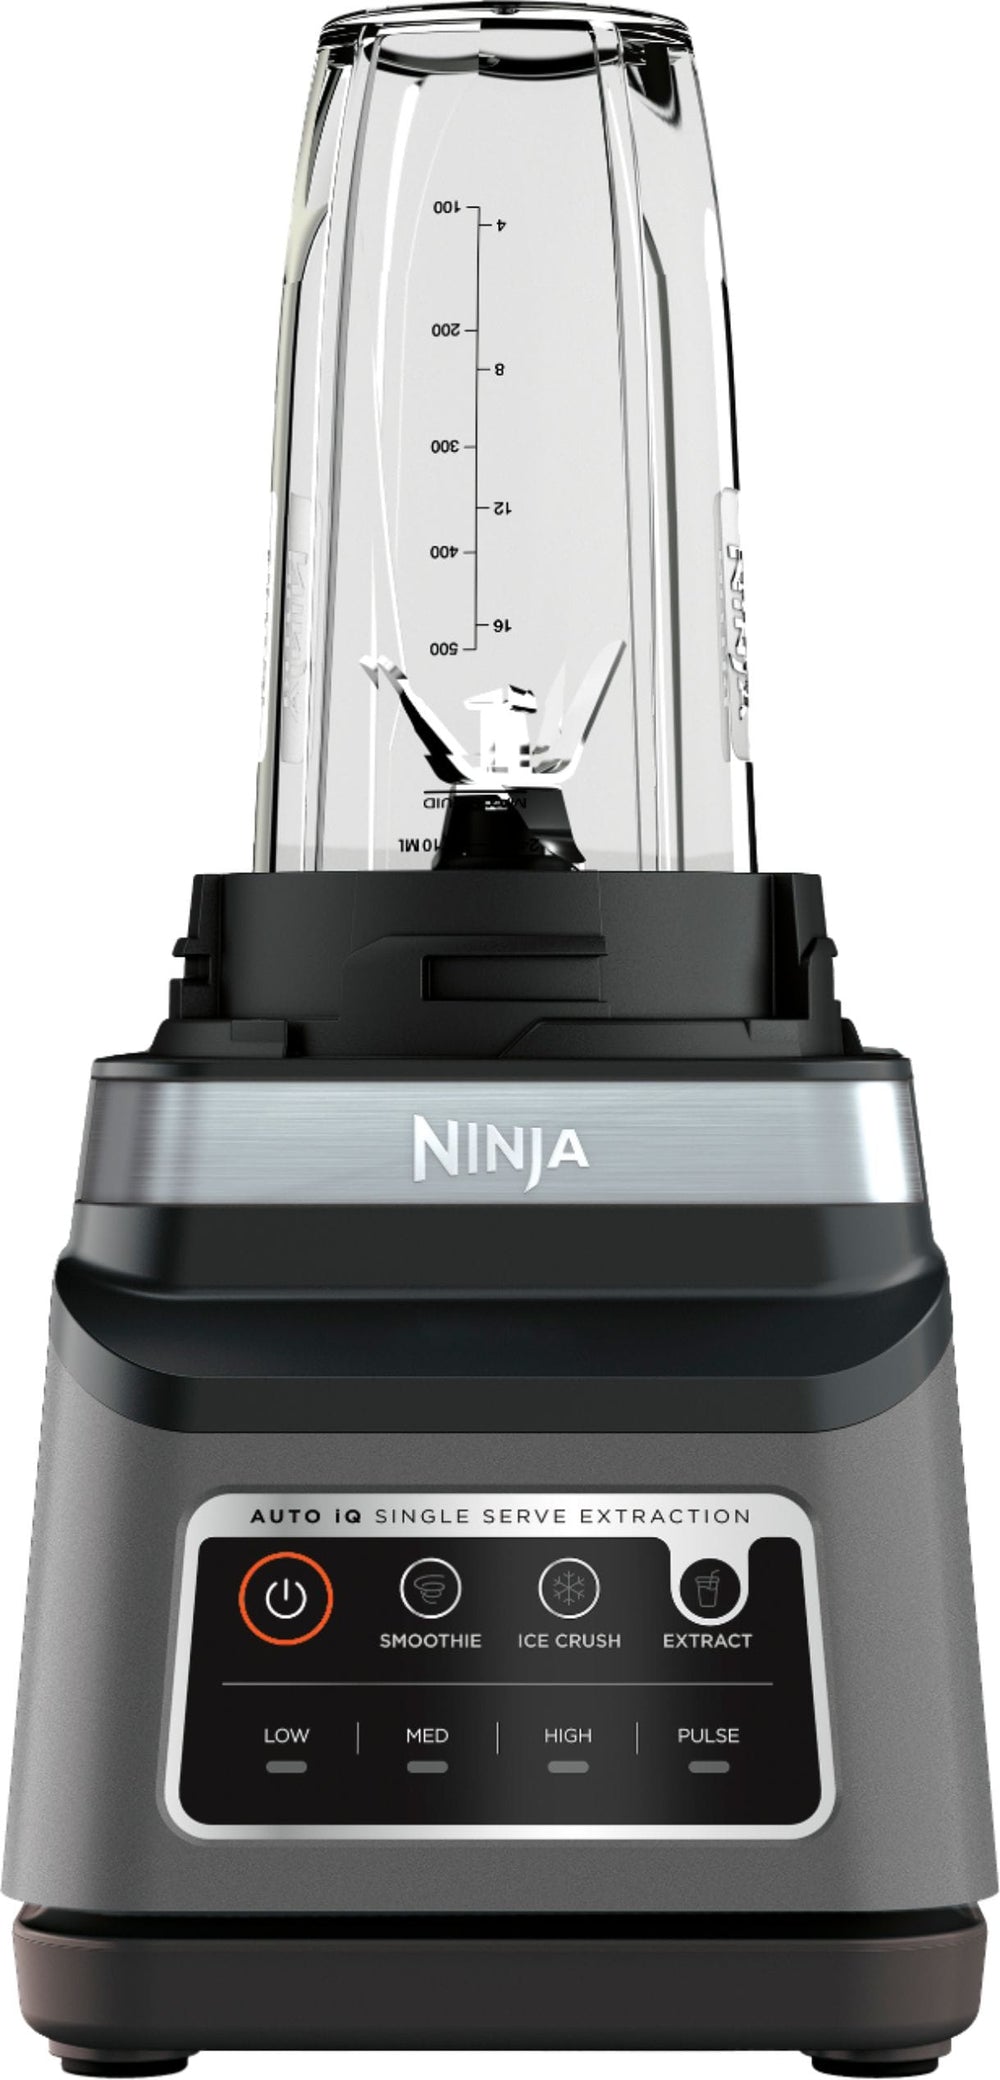 Ninja - Professional Plus Blender DUO with Auto-IQ - Black/Stainless Steel_1